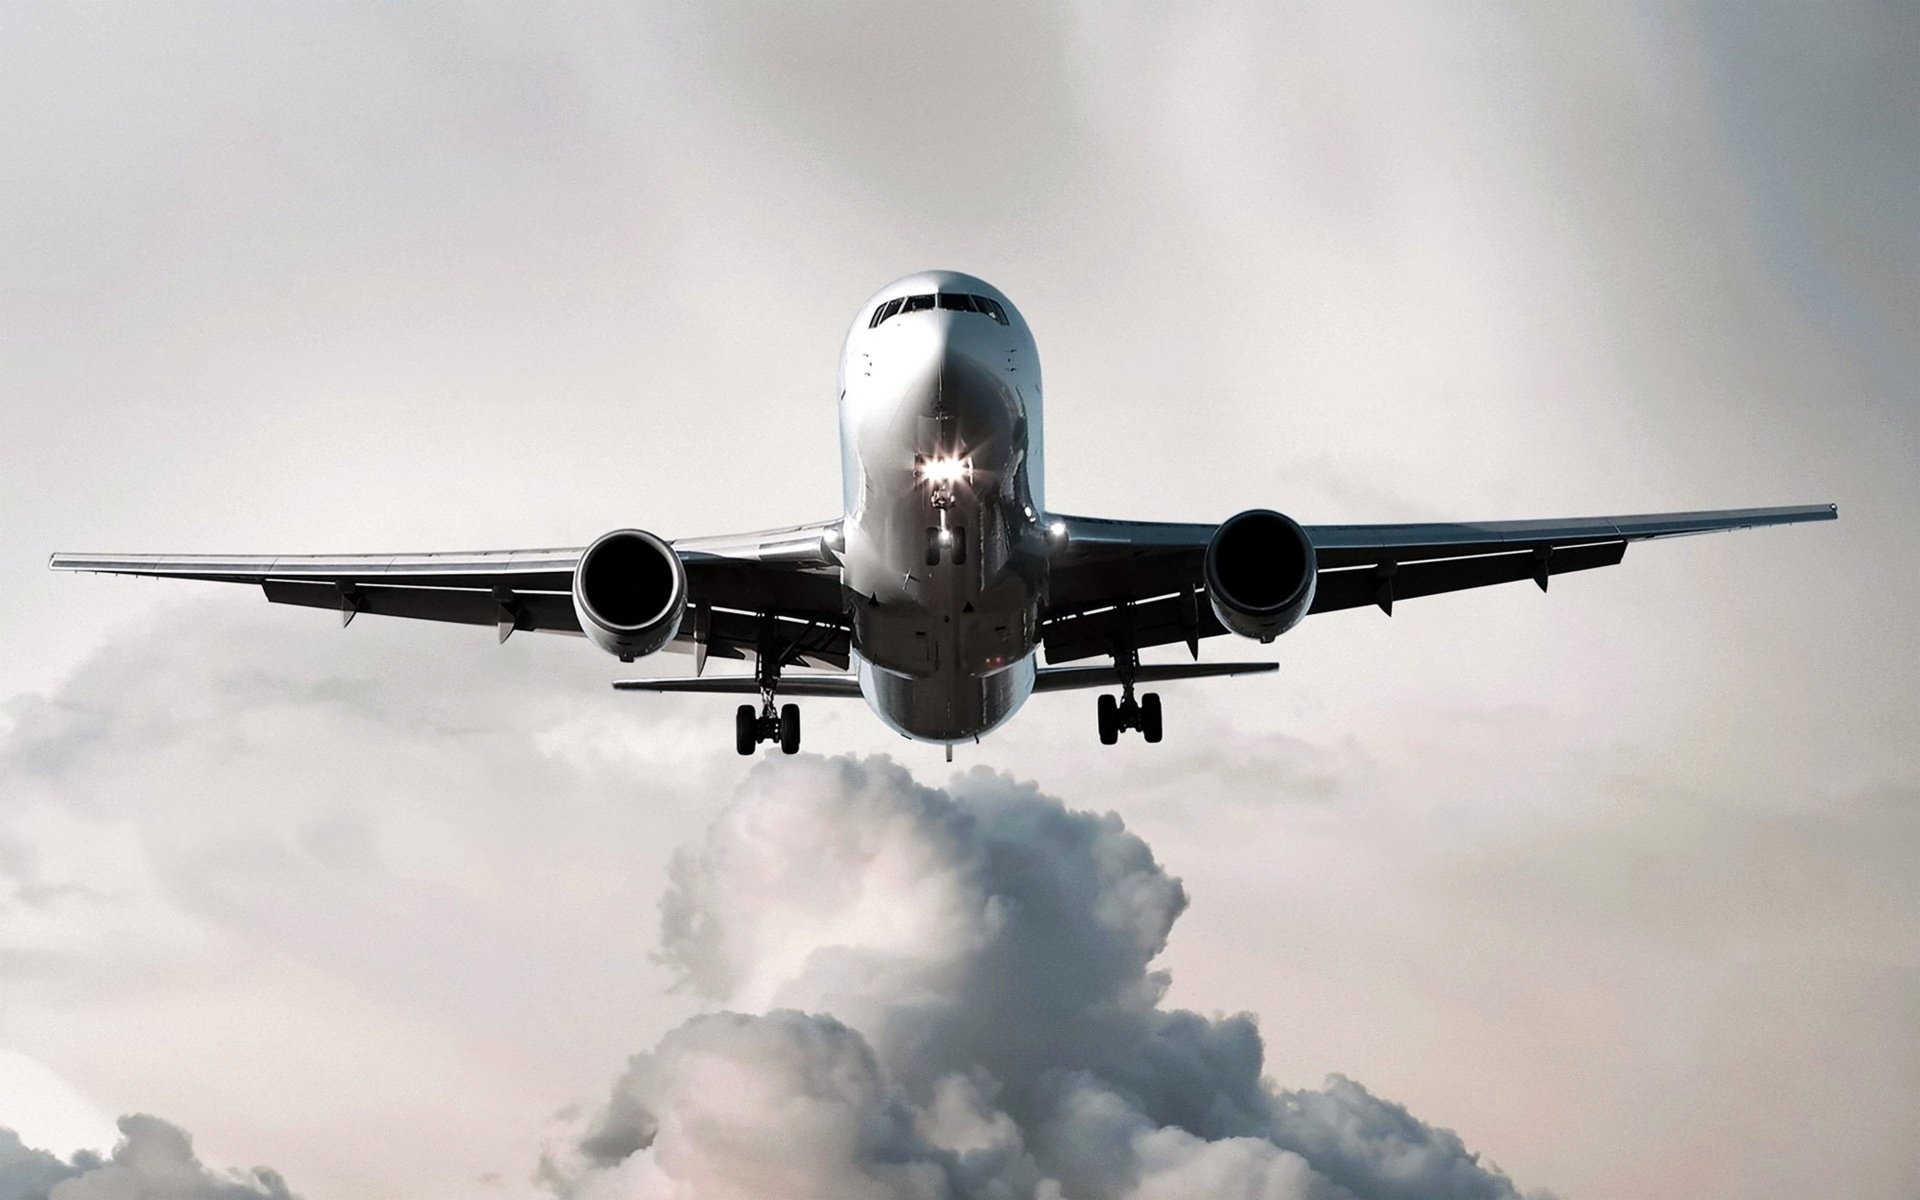 Three ways airlines are winning customers across digital channels